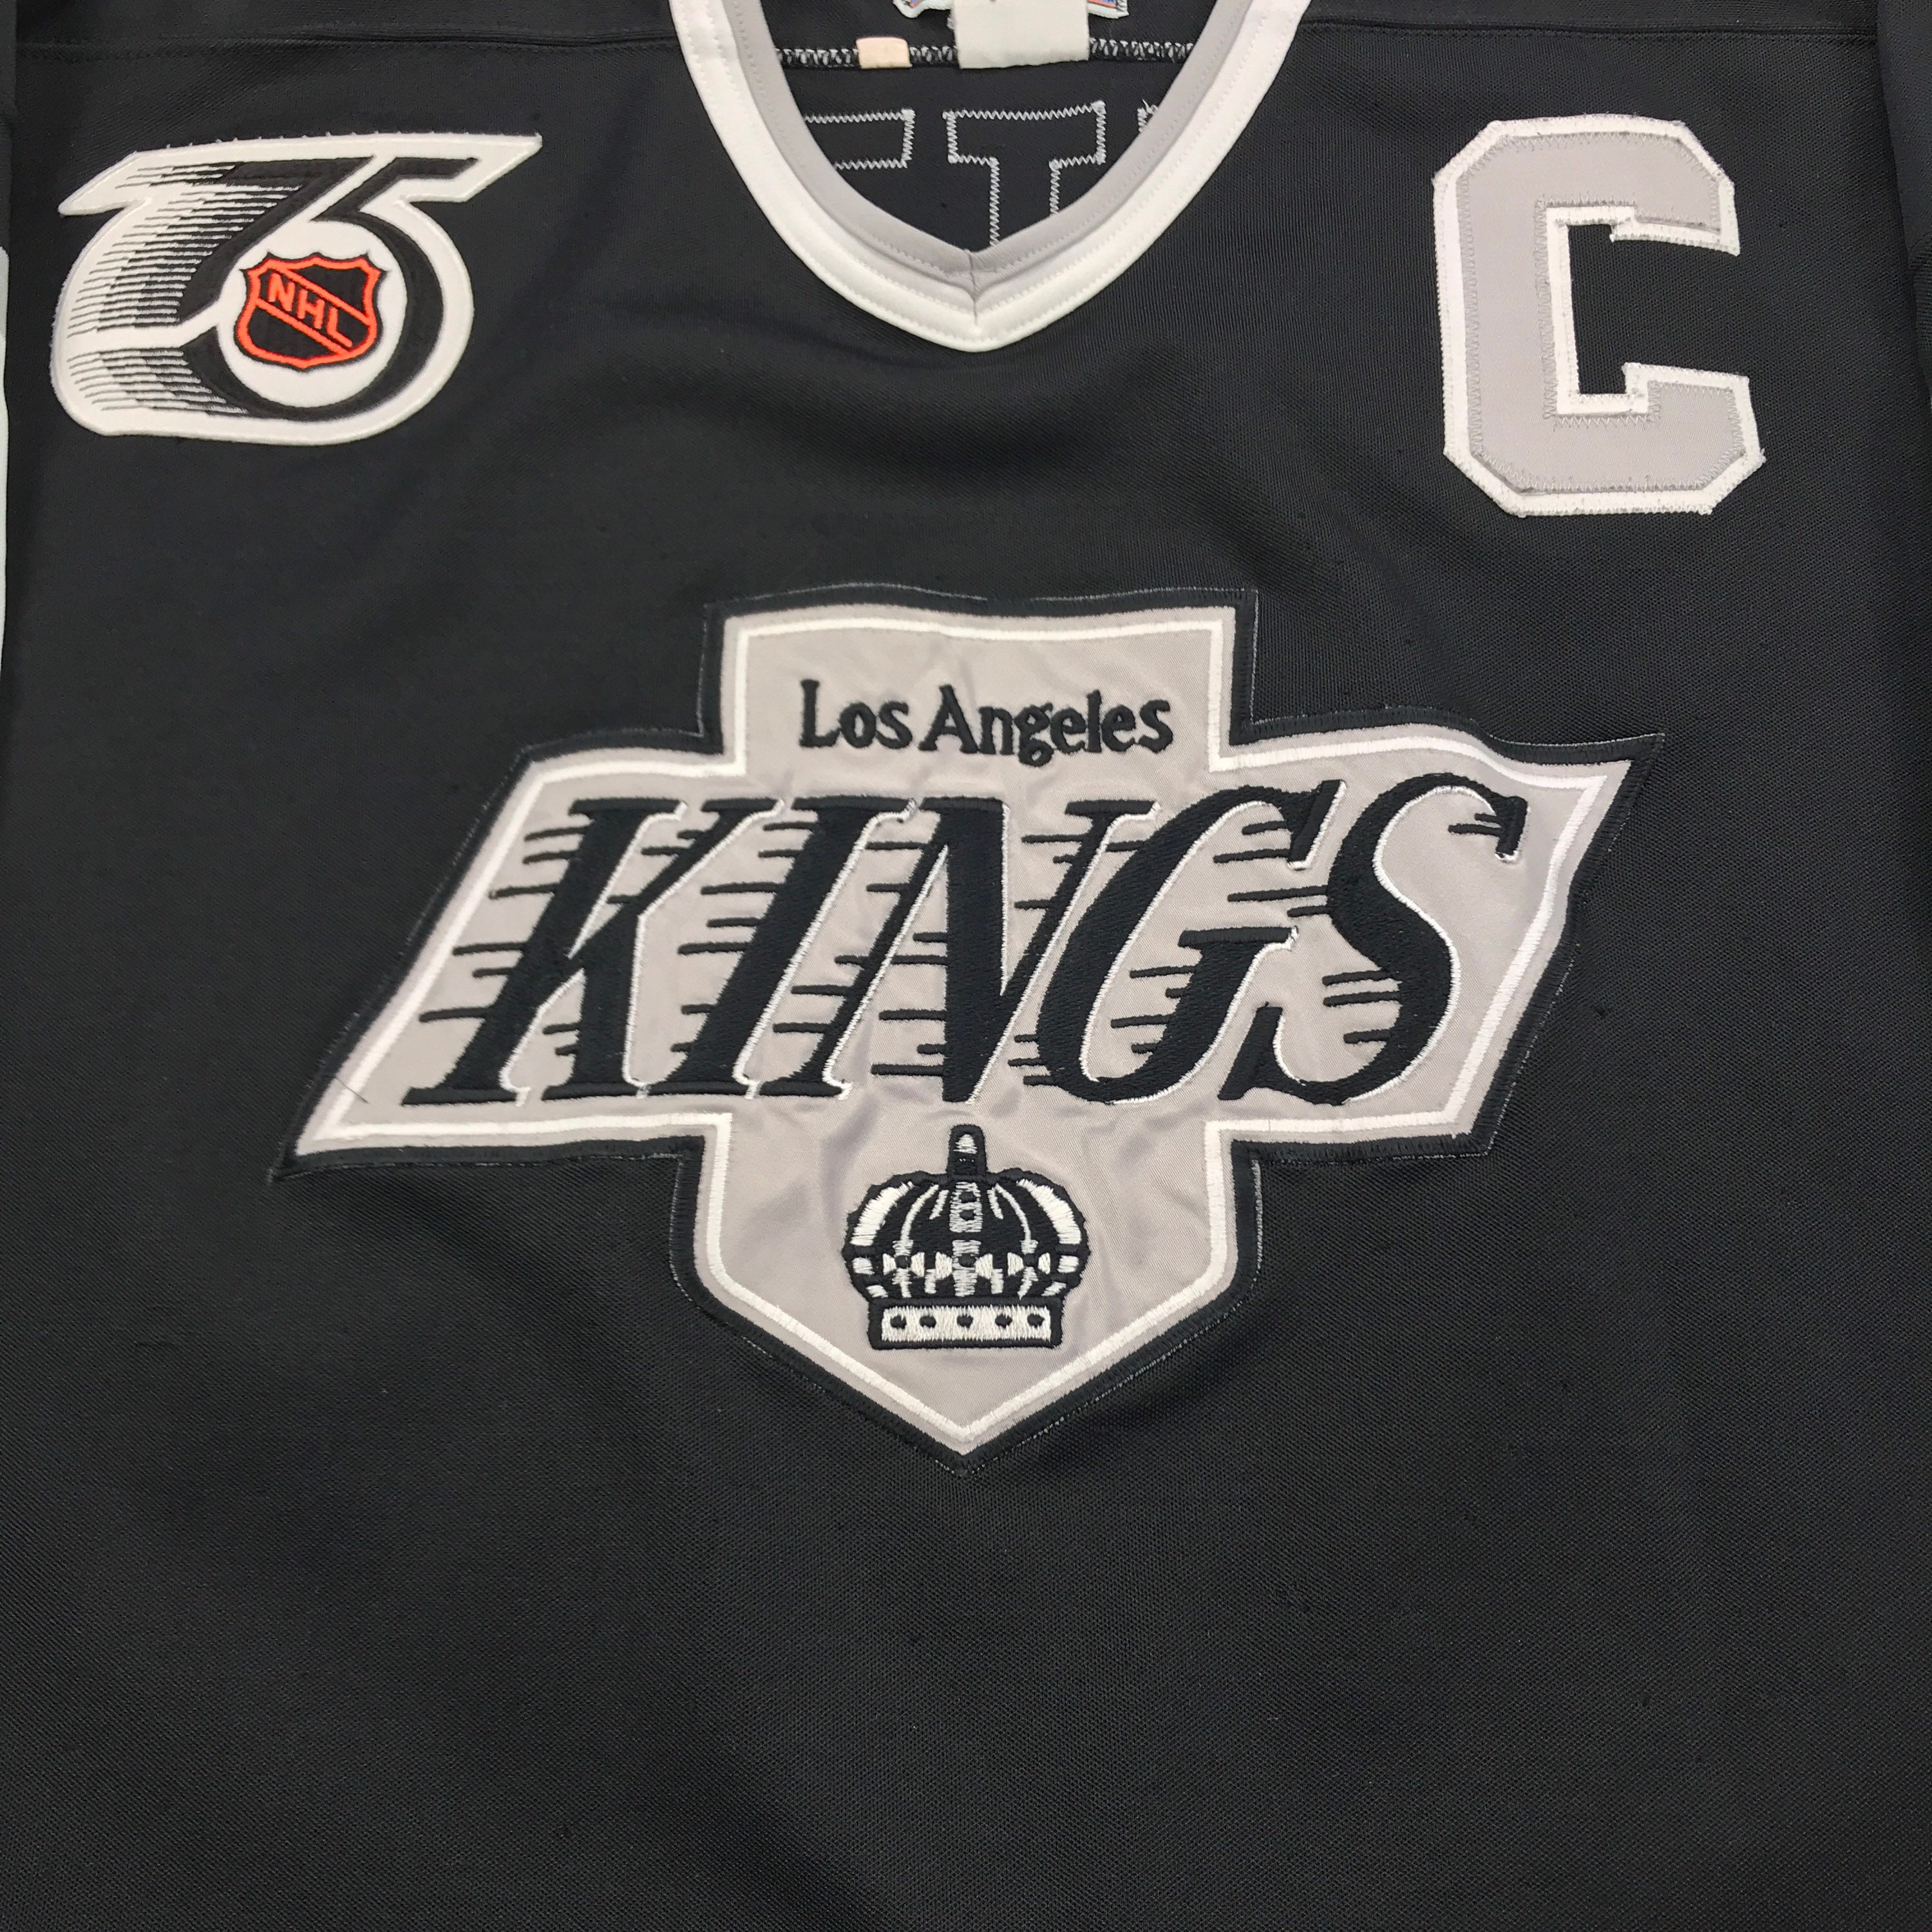 LOS ANGELES LA KINGS 2000 CCM CENTER ICE NHL AUTHENTIC HOCKEY HOME JERSEY  SZ 52